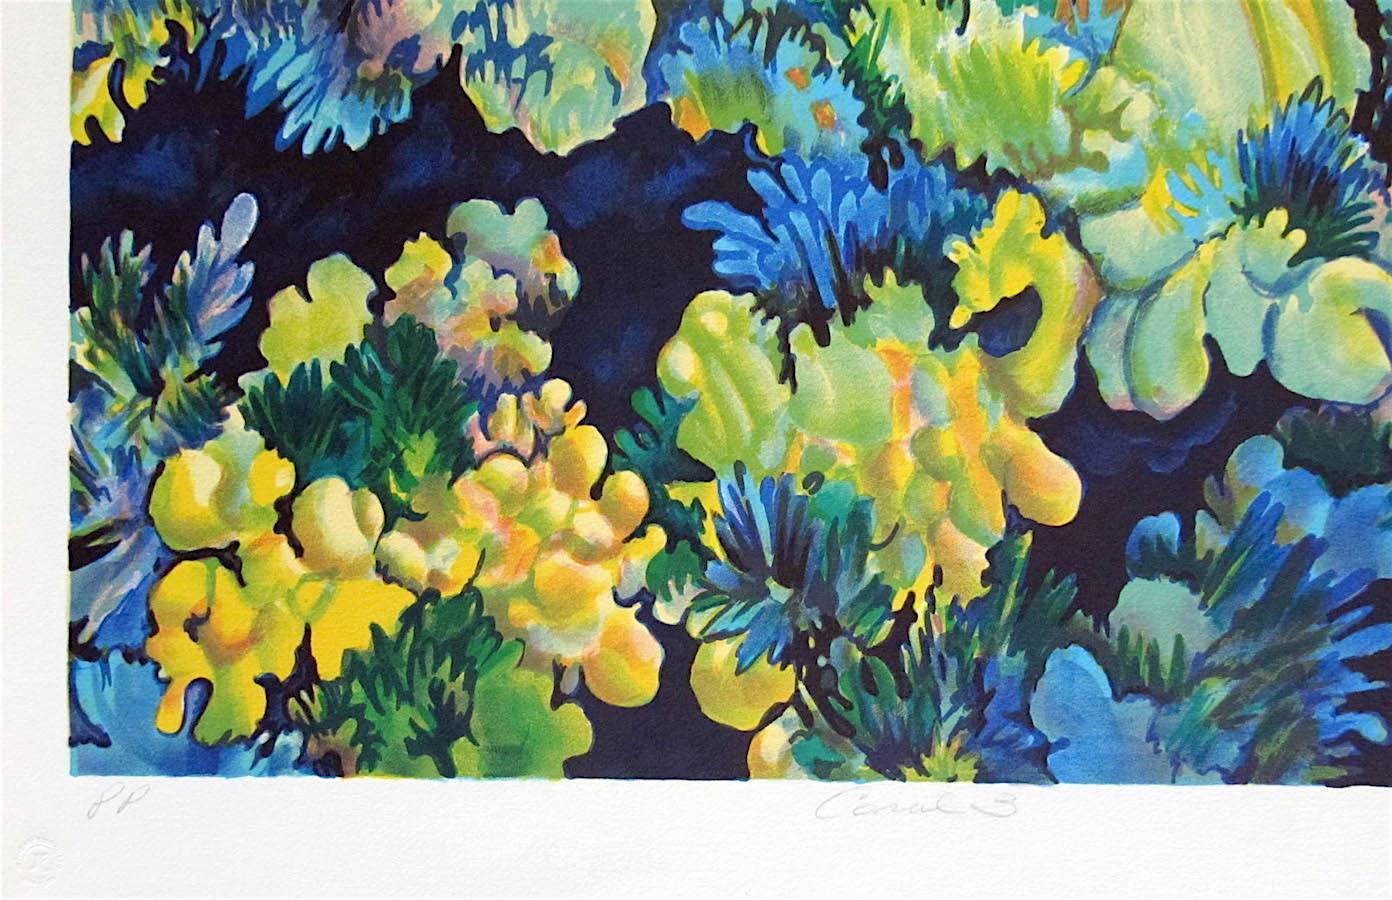 Coral 3 is an original hand drawn lithograph created in 1979 by the NY woman artist, Joan Melnick. Inspired by the fragile beauty of reefs with their exotic forms and vibrant colors, Coral 3 is an abstract composition comprised of deep shades of